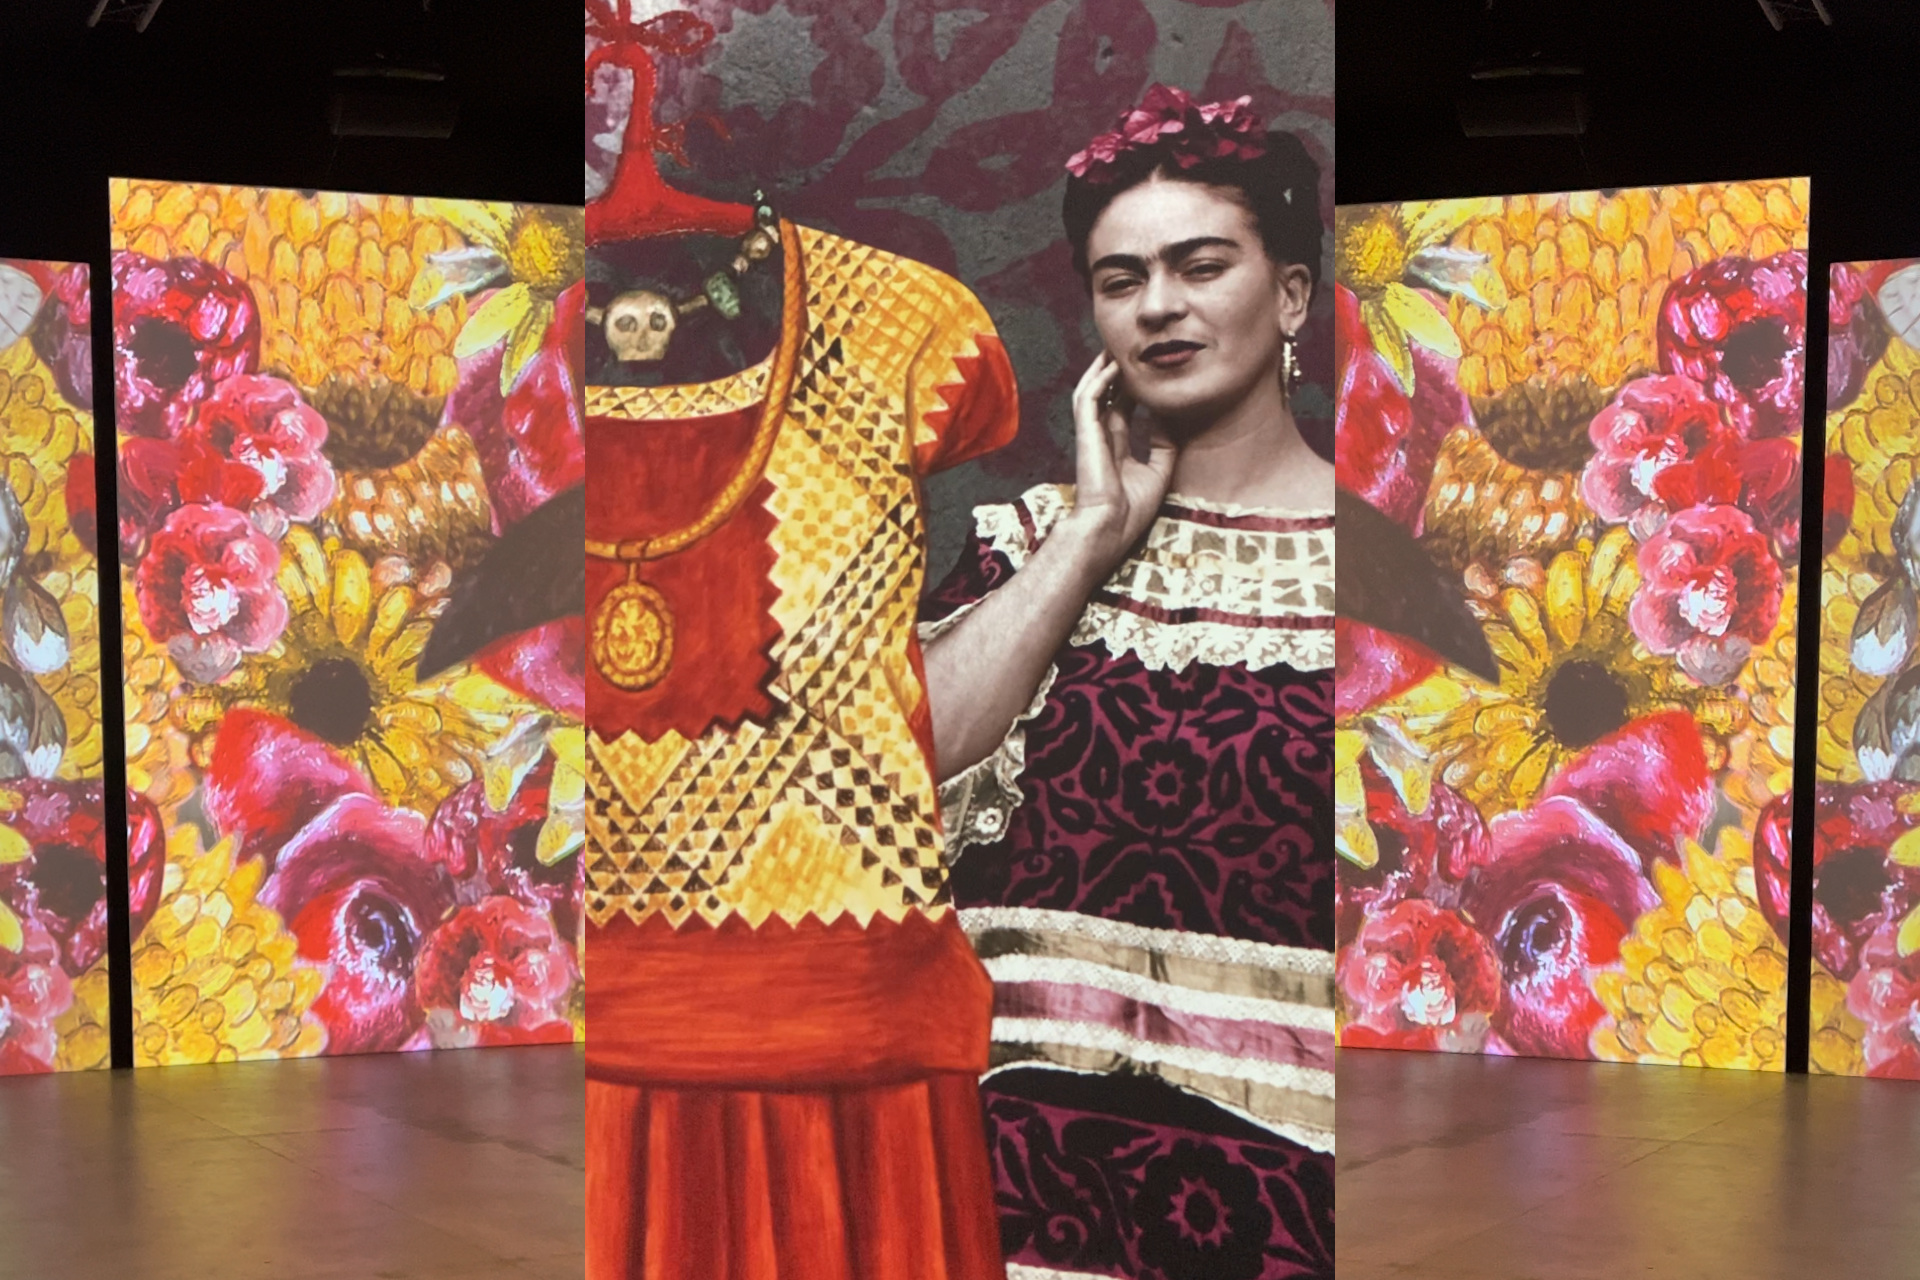 Three images (from L to R): photo of large screen depicting paintings of pink and yellow flowers, a photograph of Frida Kahlo collaged with one of her dresses, a mirror image of the first photo